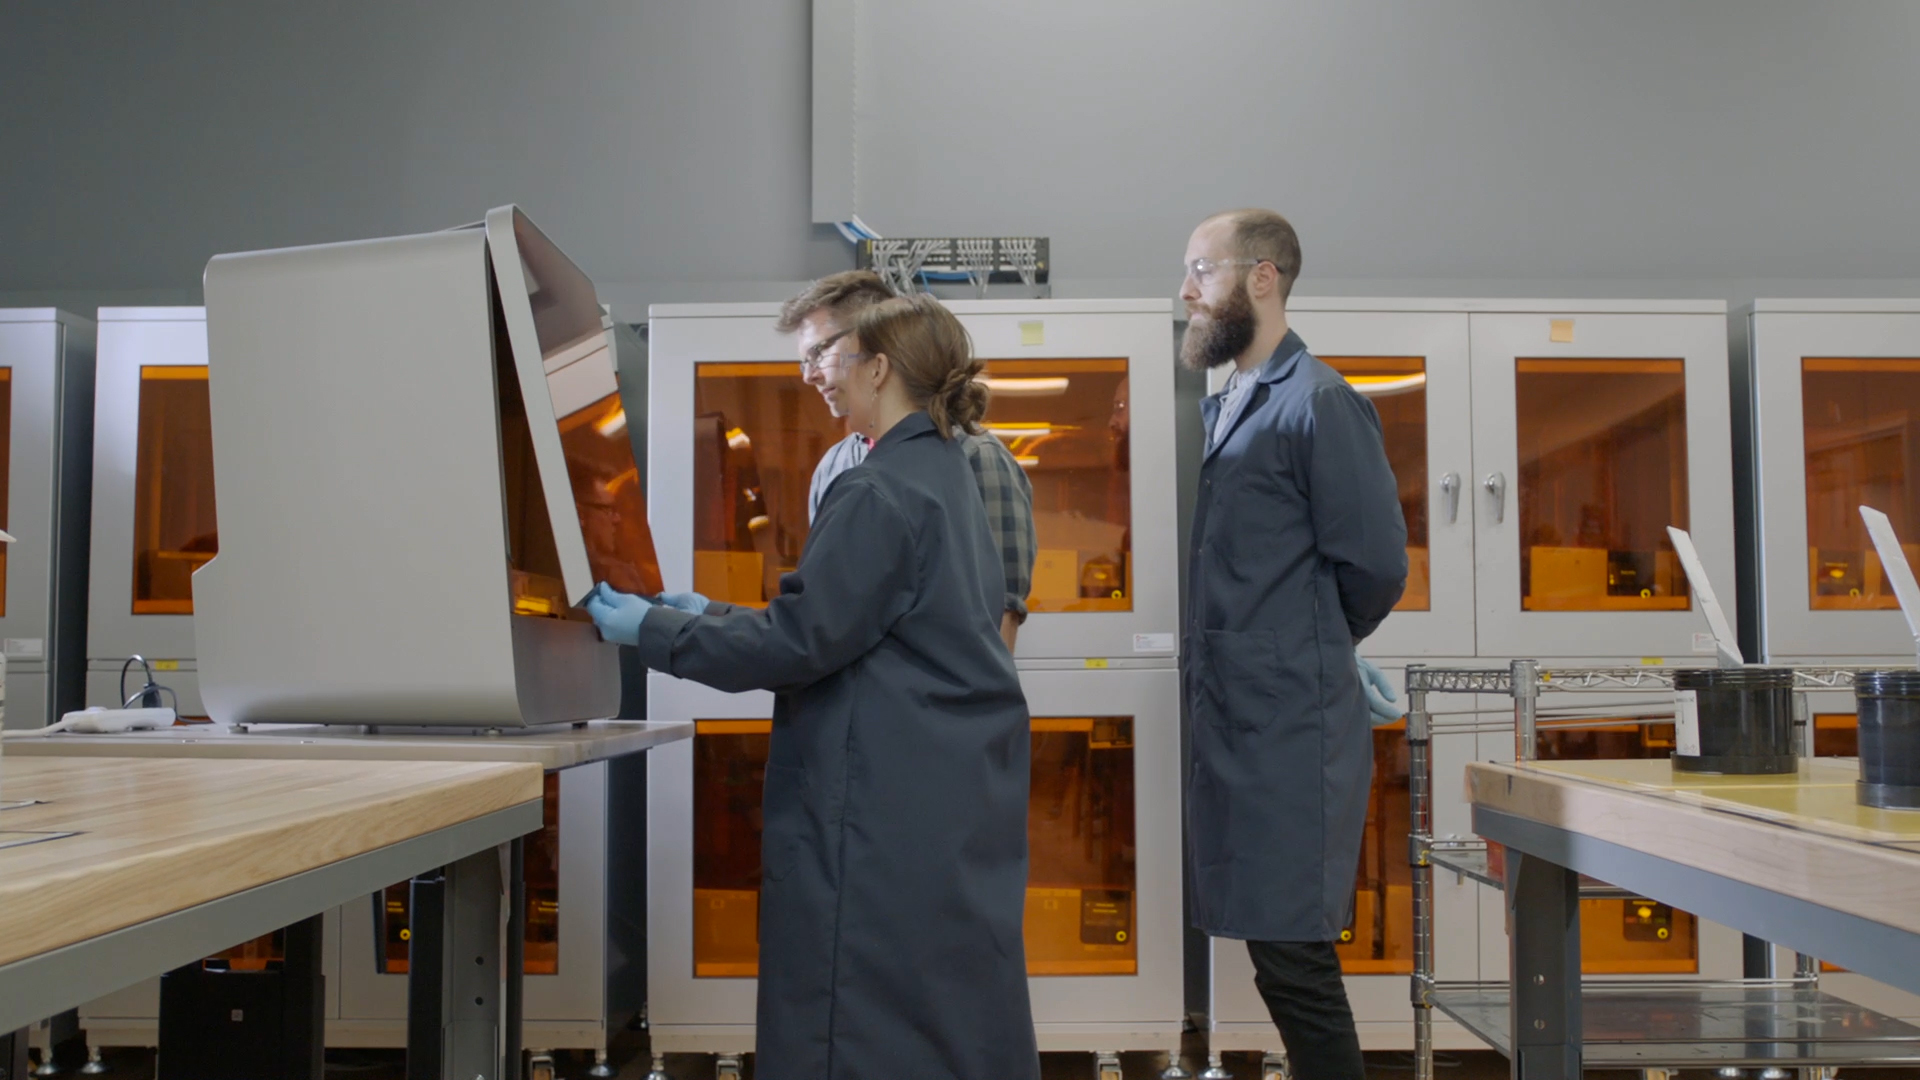 Image Of New Balance Team With Formlabs 3d Printers - New Balance Formlabs - HD Wallpaper 